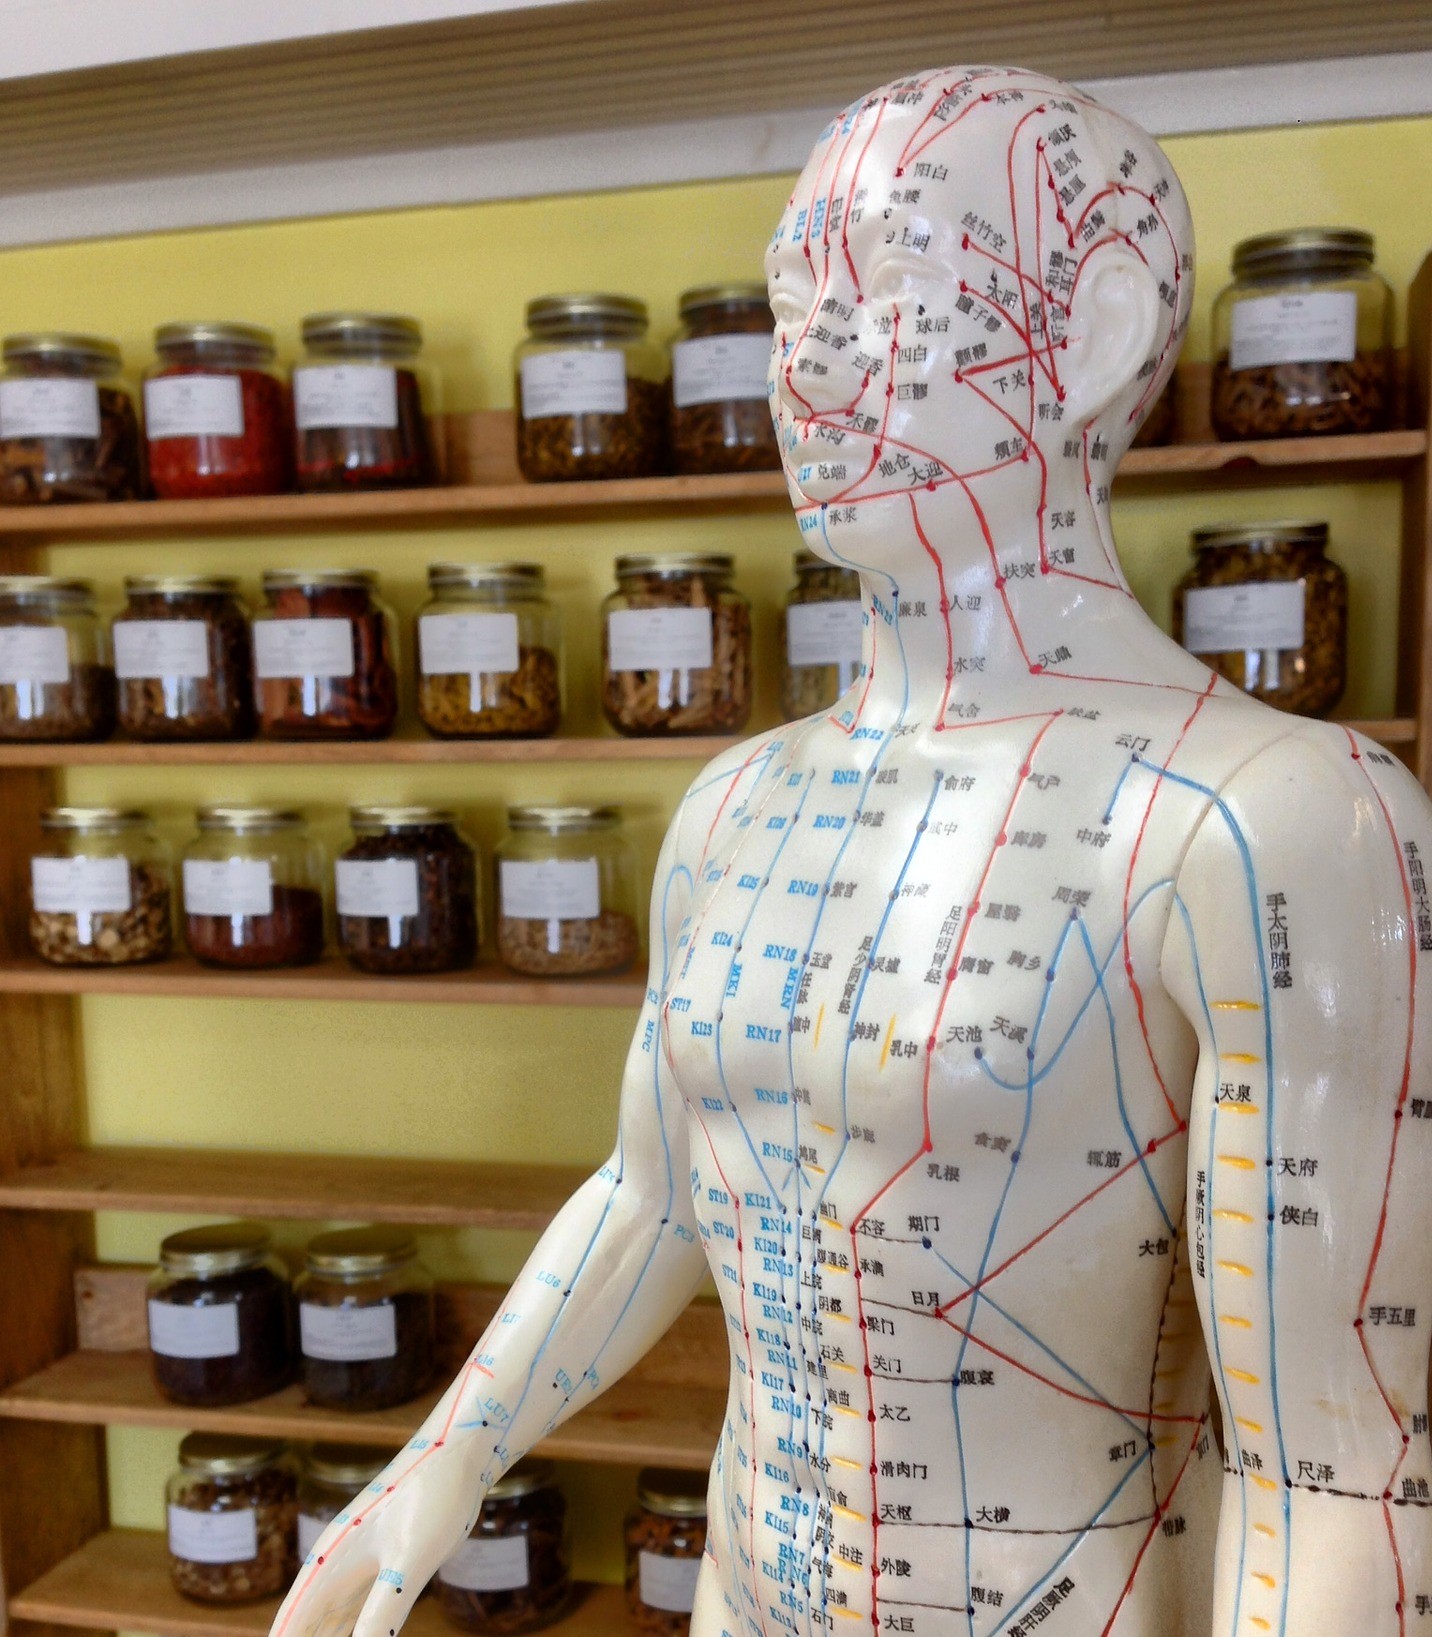 TCM and Acupuncture